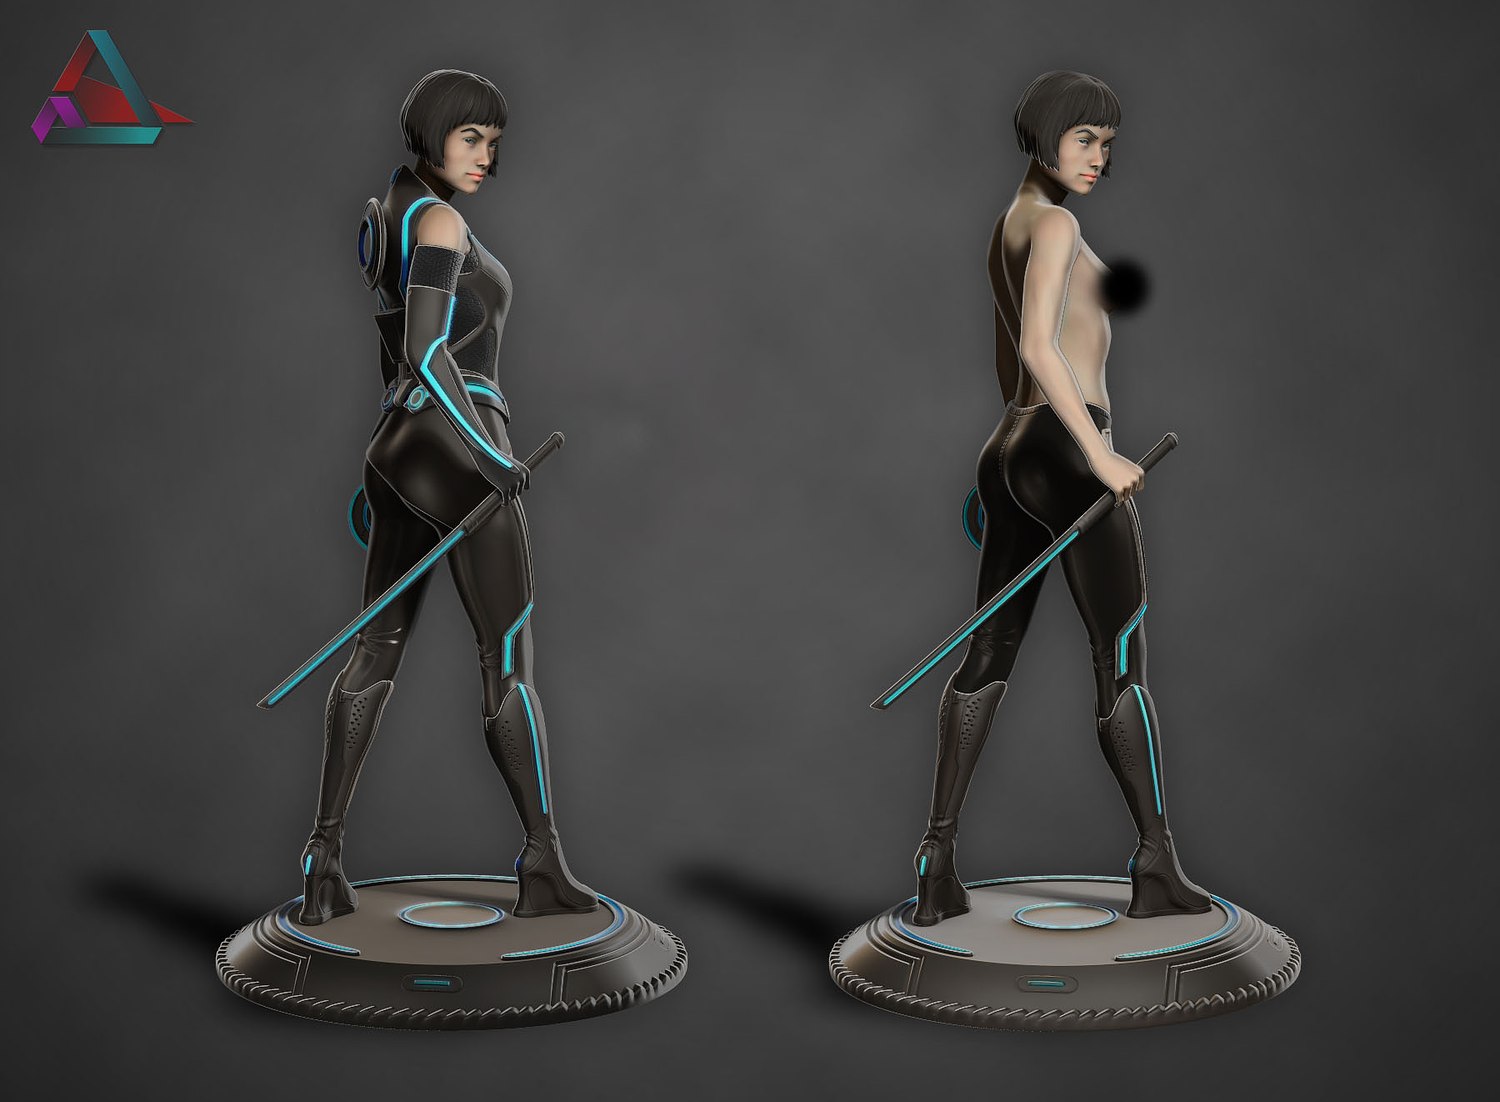 Quorra from Tron